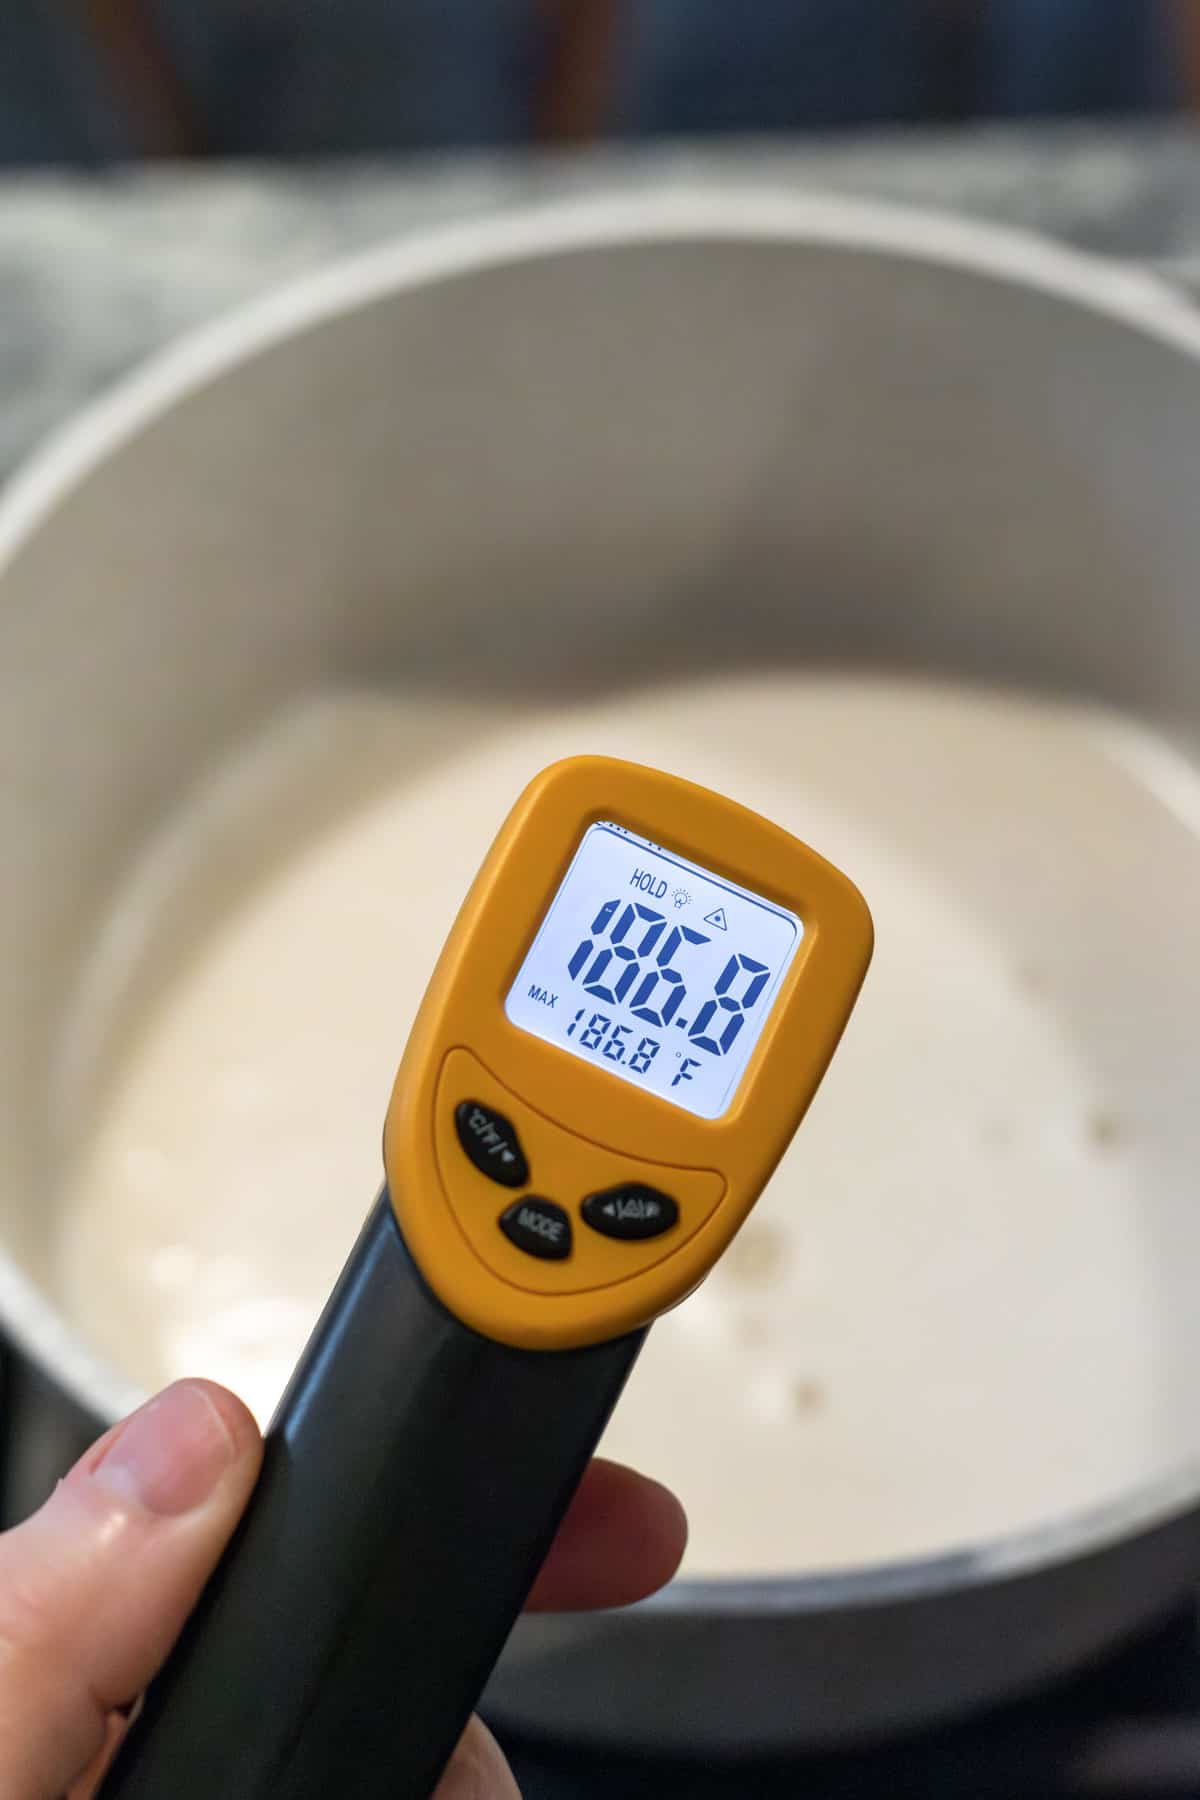 Final stage of making oat milk replicates the pasteurization done by commercial brands.